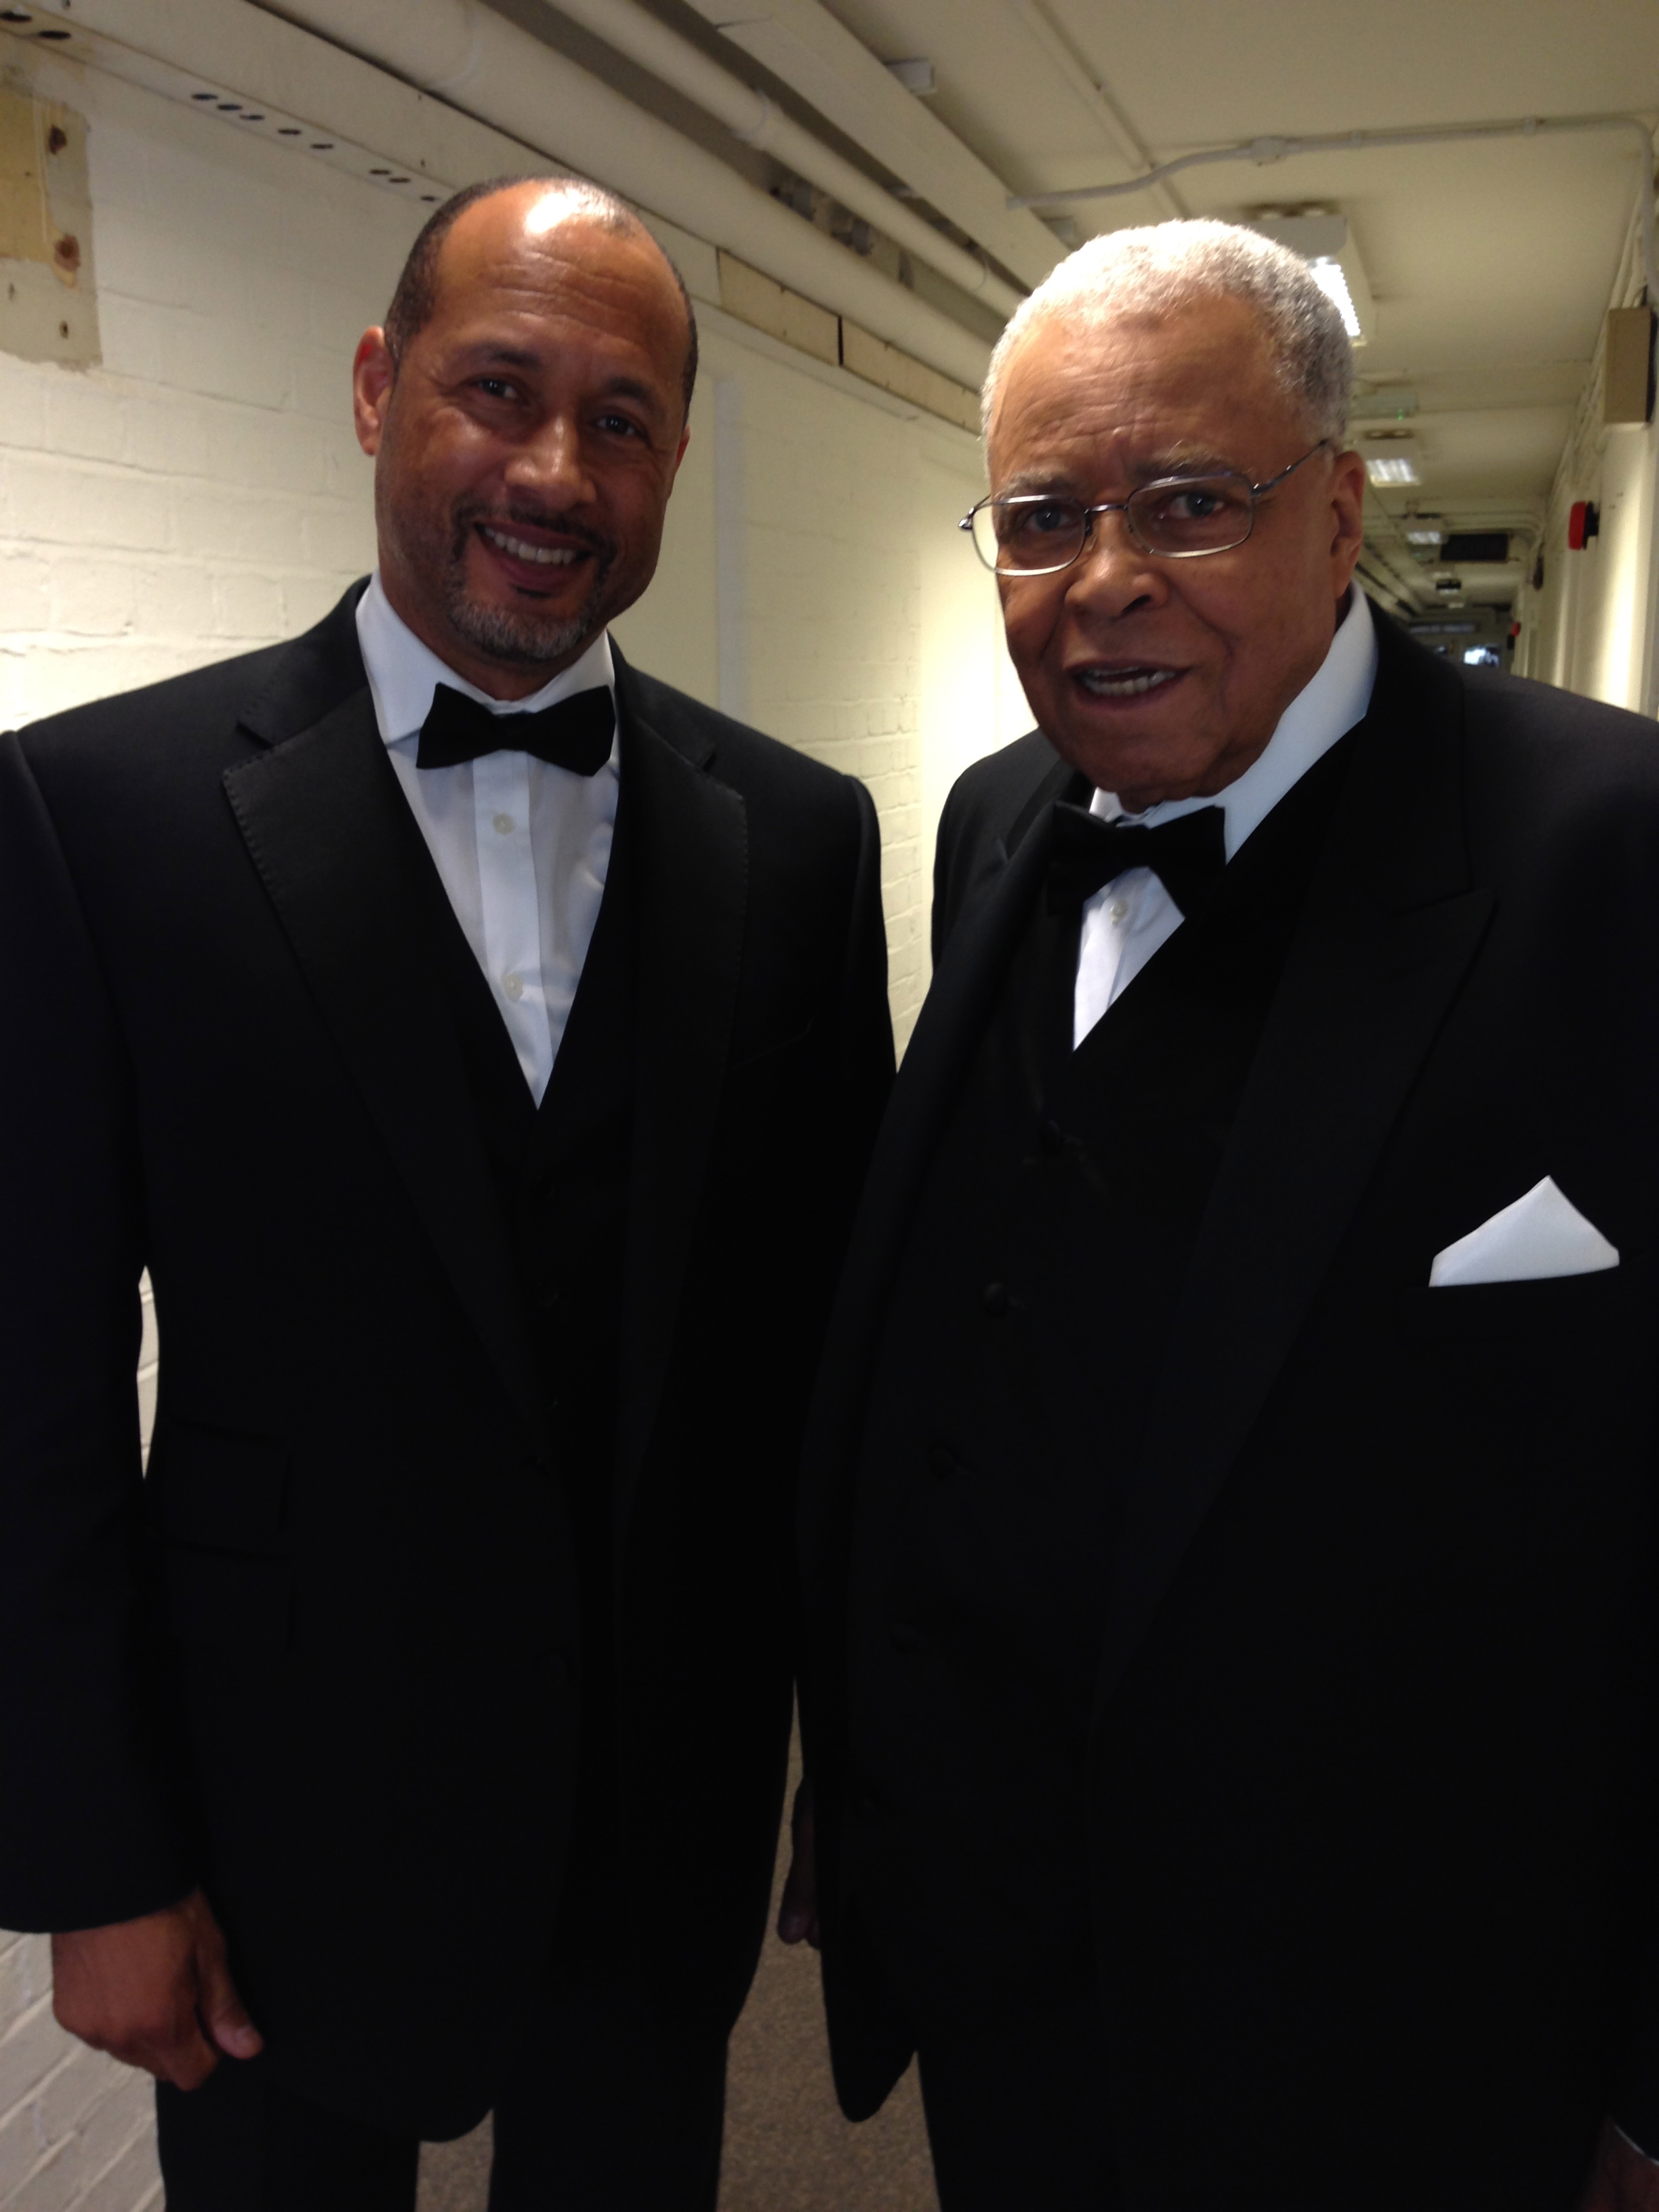 Mark Holden with James Earl Jones on the set of a Sprint commercial in London 2013.